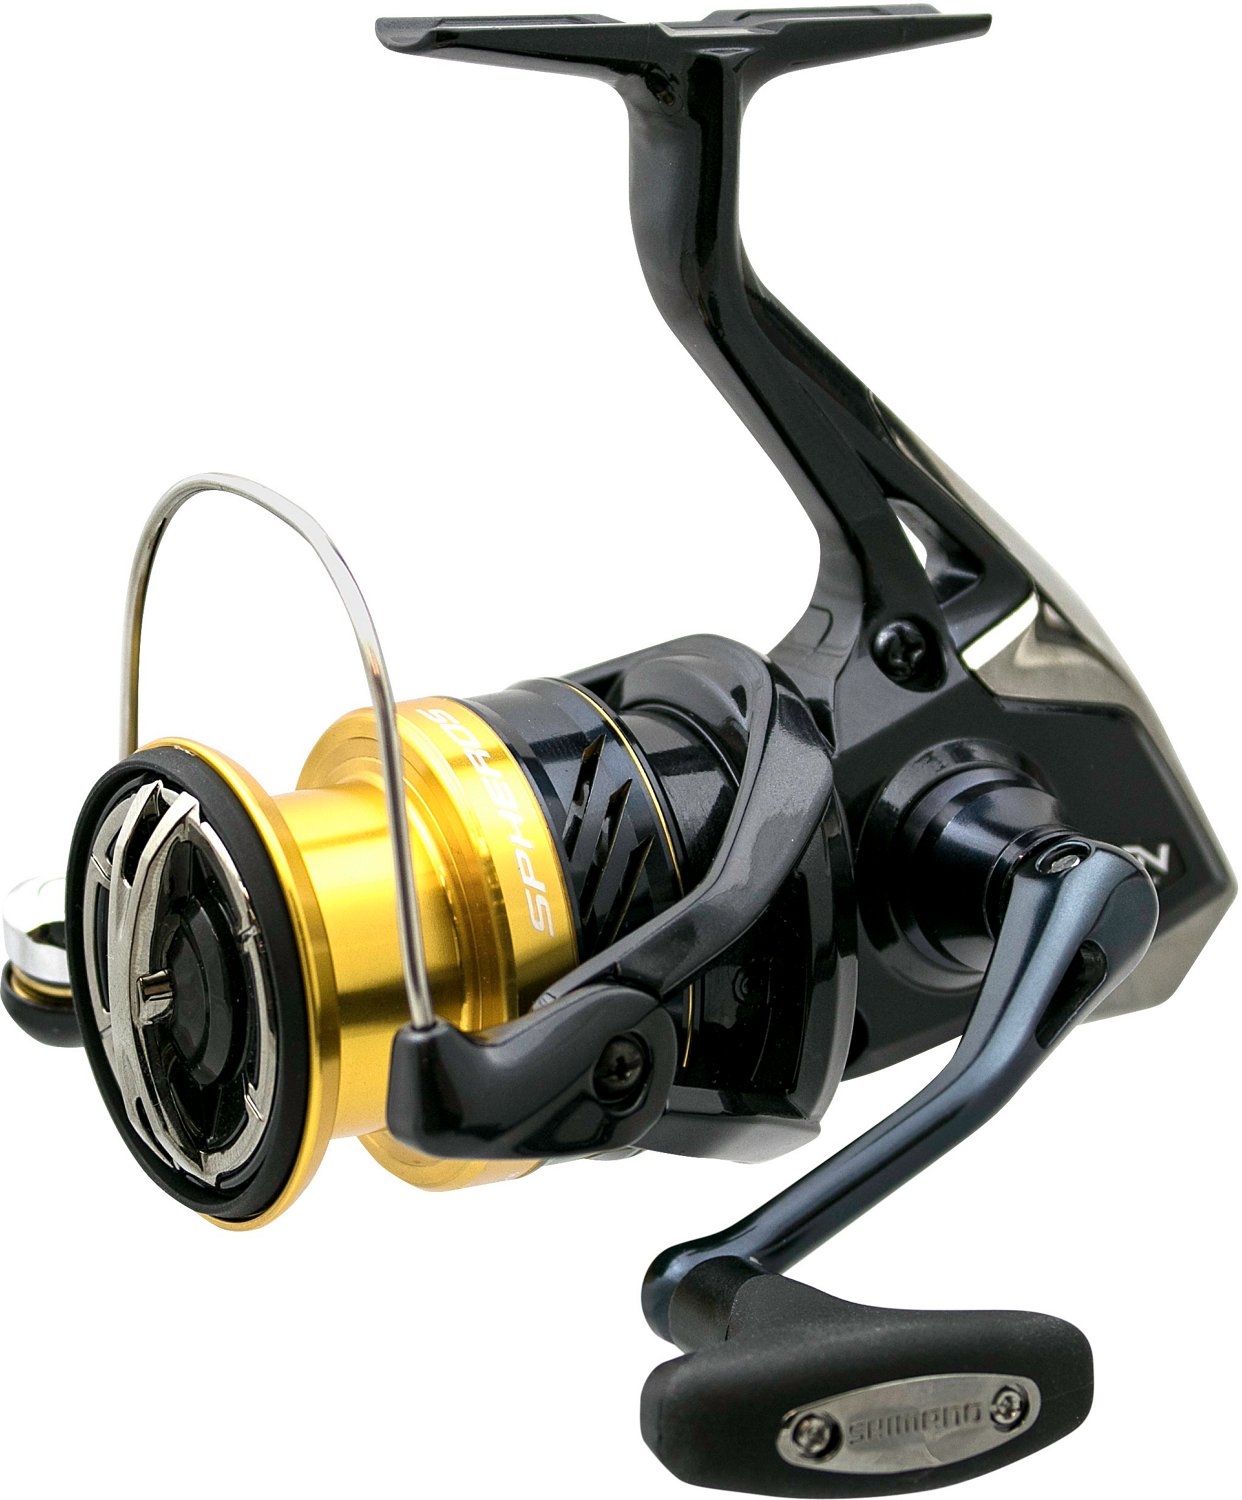 Shimano Spheros SW Spinning Reel | Free Shipping at Academy